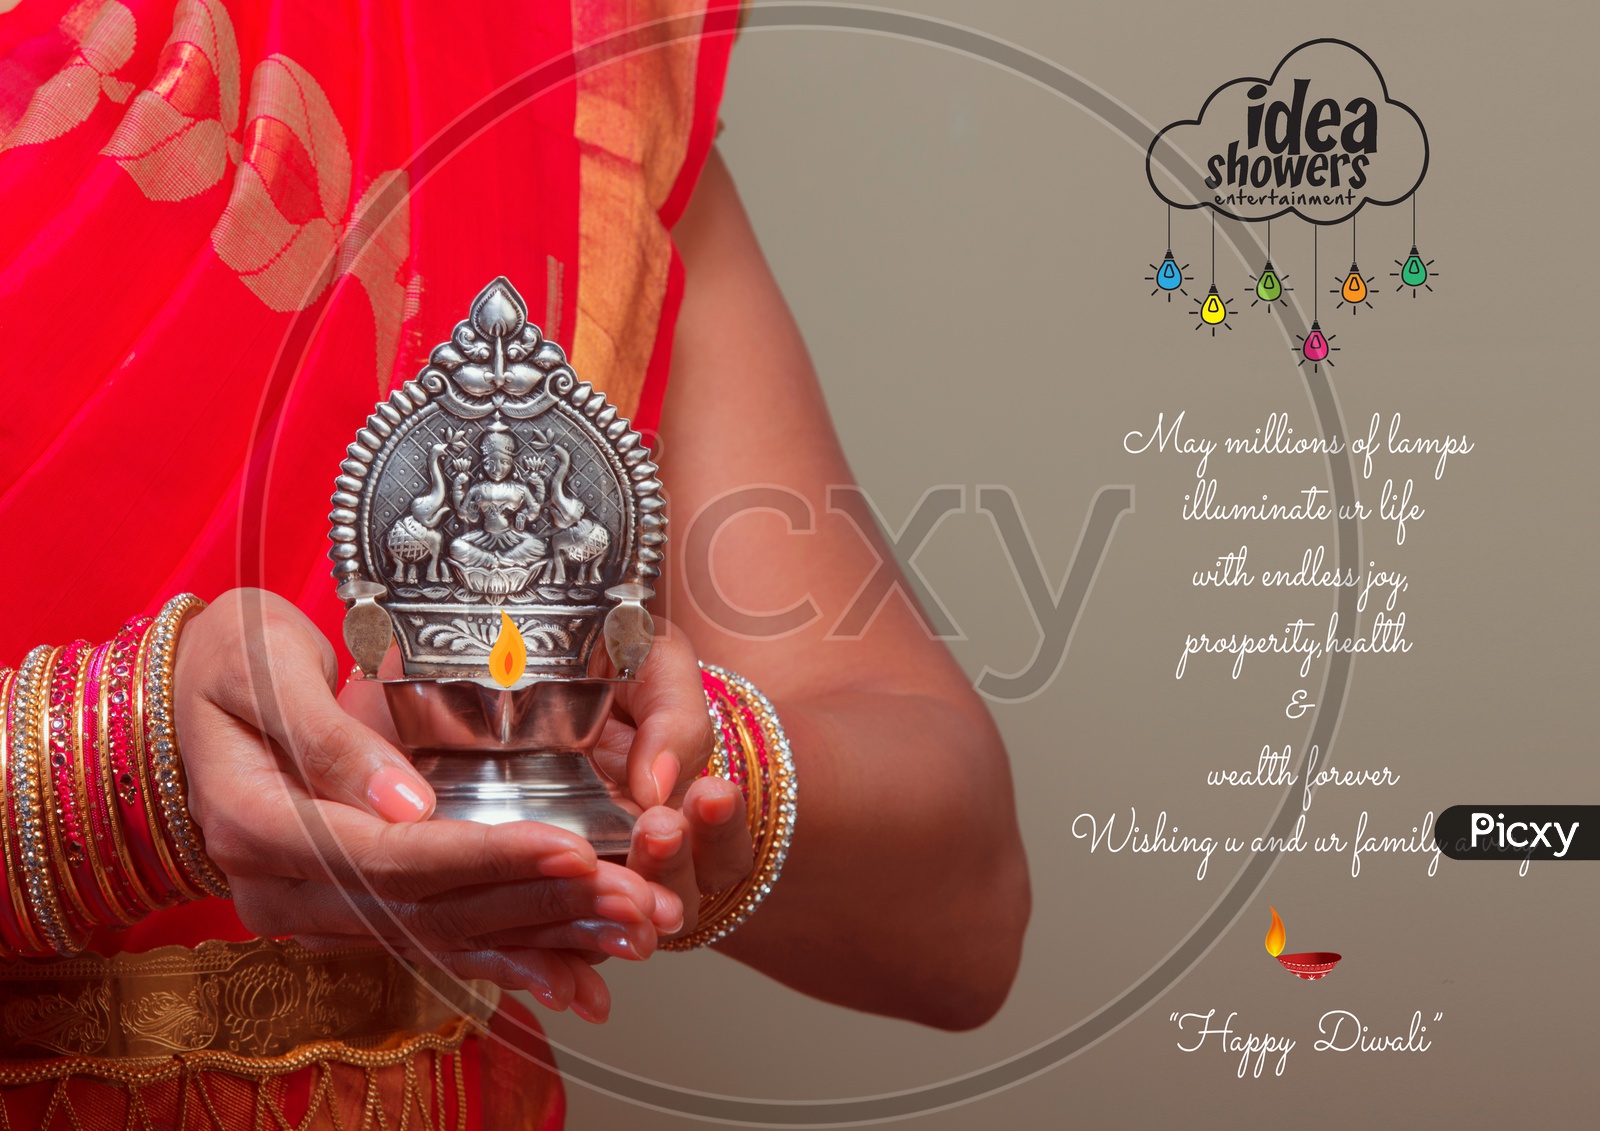 A Beautiful Indian Female Model  in Traditional Attire Wearing a Saree and Jewelry  With a Traditional Silver Oil Lamp In Hands  with Space  Closeup Shot